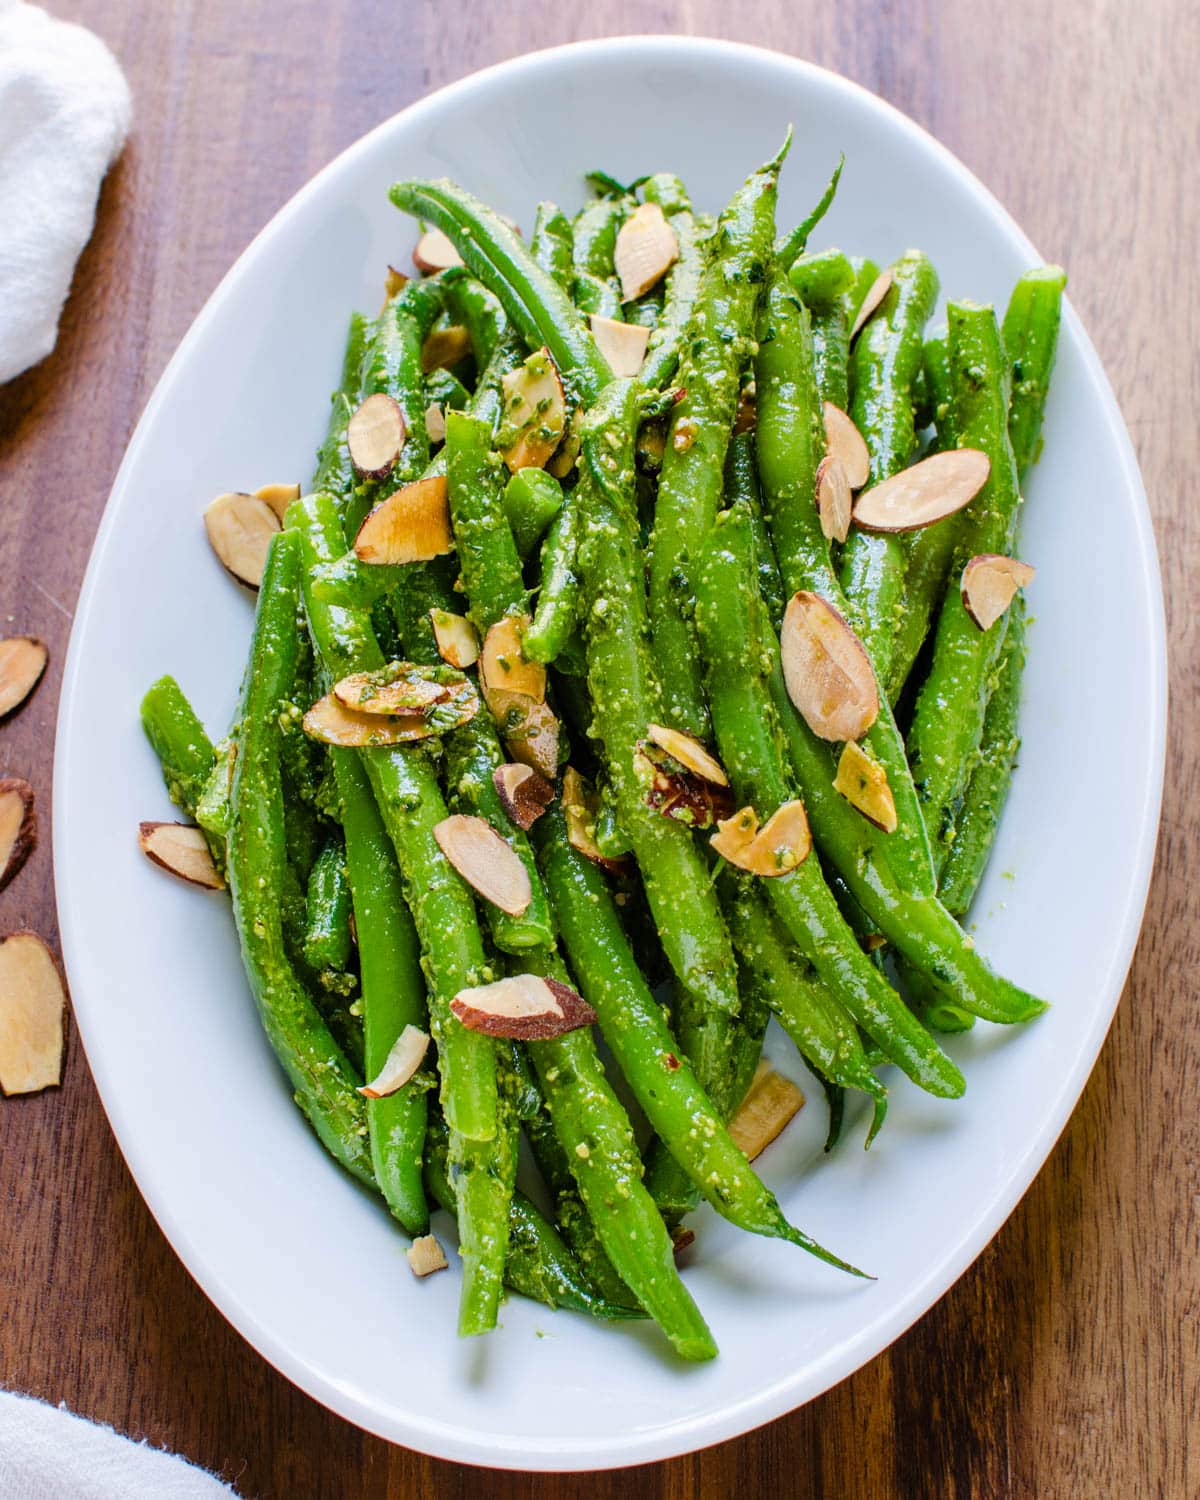 A serving dish with Italian green beans and sliced almonds.